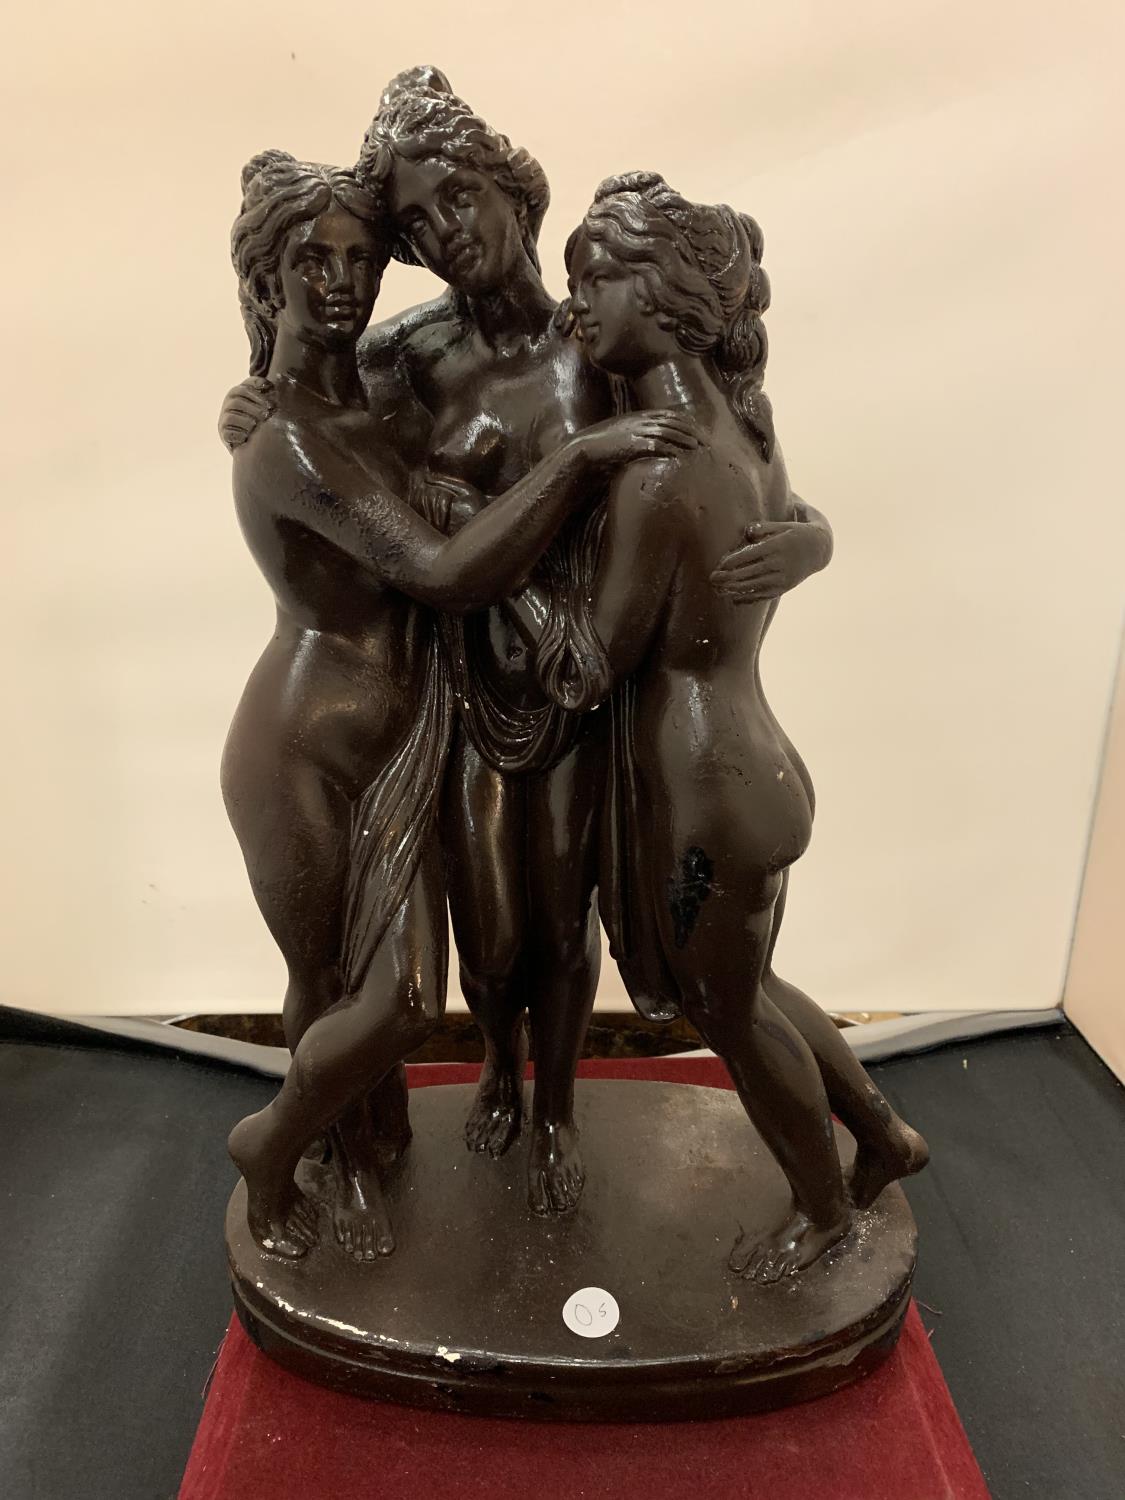 AN ORNAMENT DEPICTING THE THREE MUSES - HEIGHT 43CMS